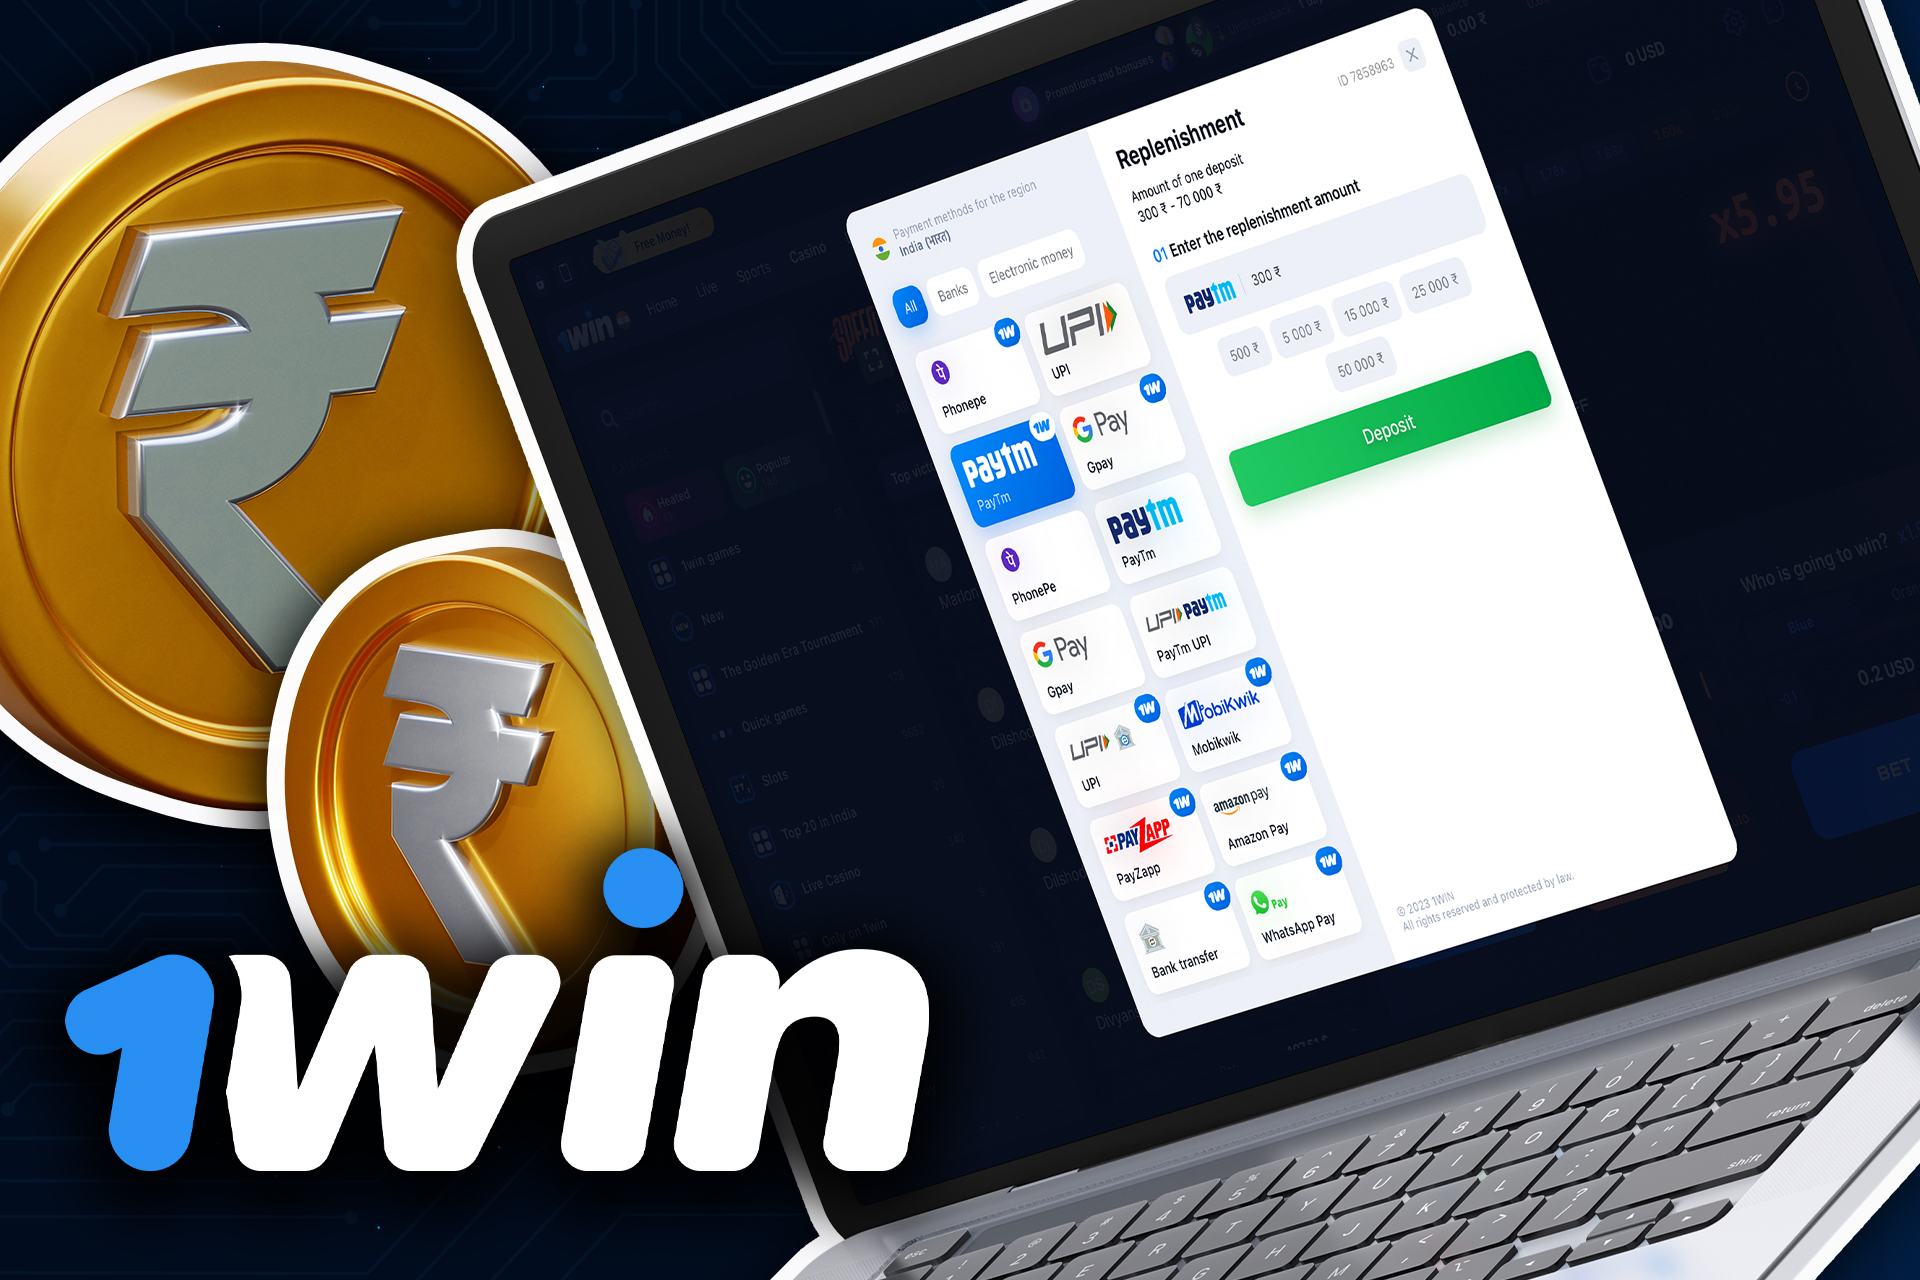 Go to the 1win cashier to top up your account.